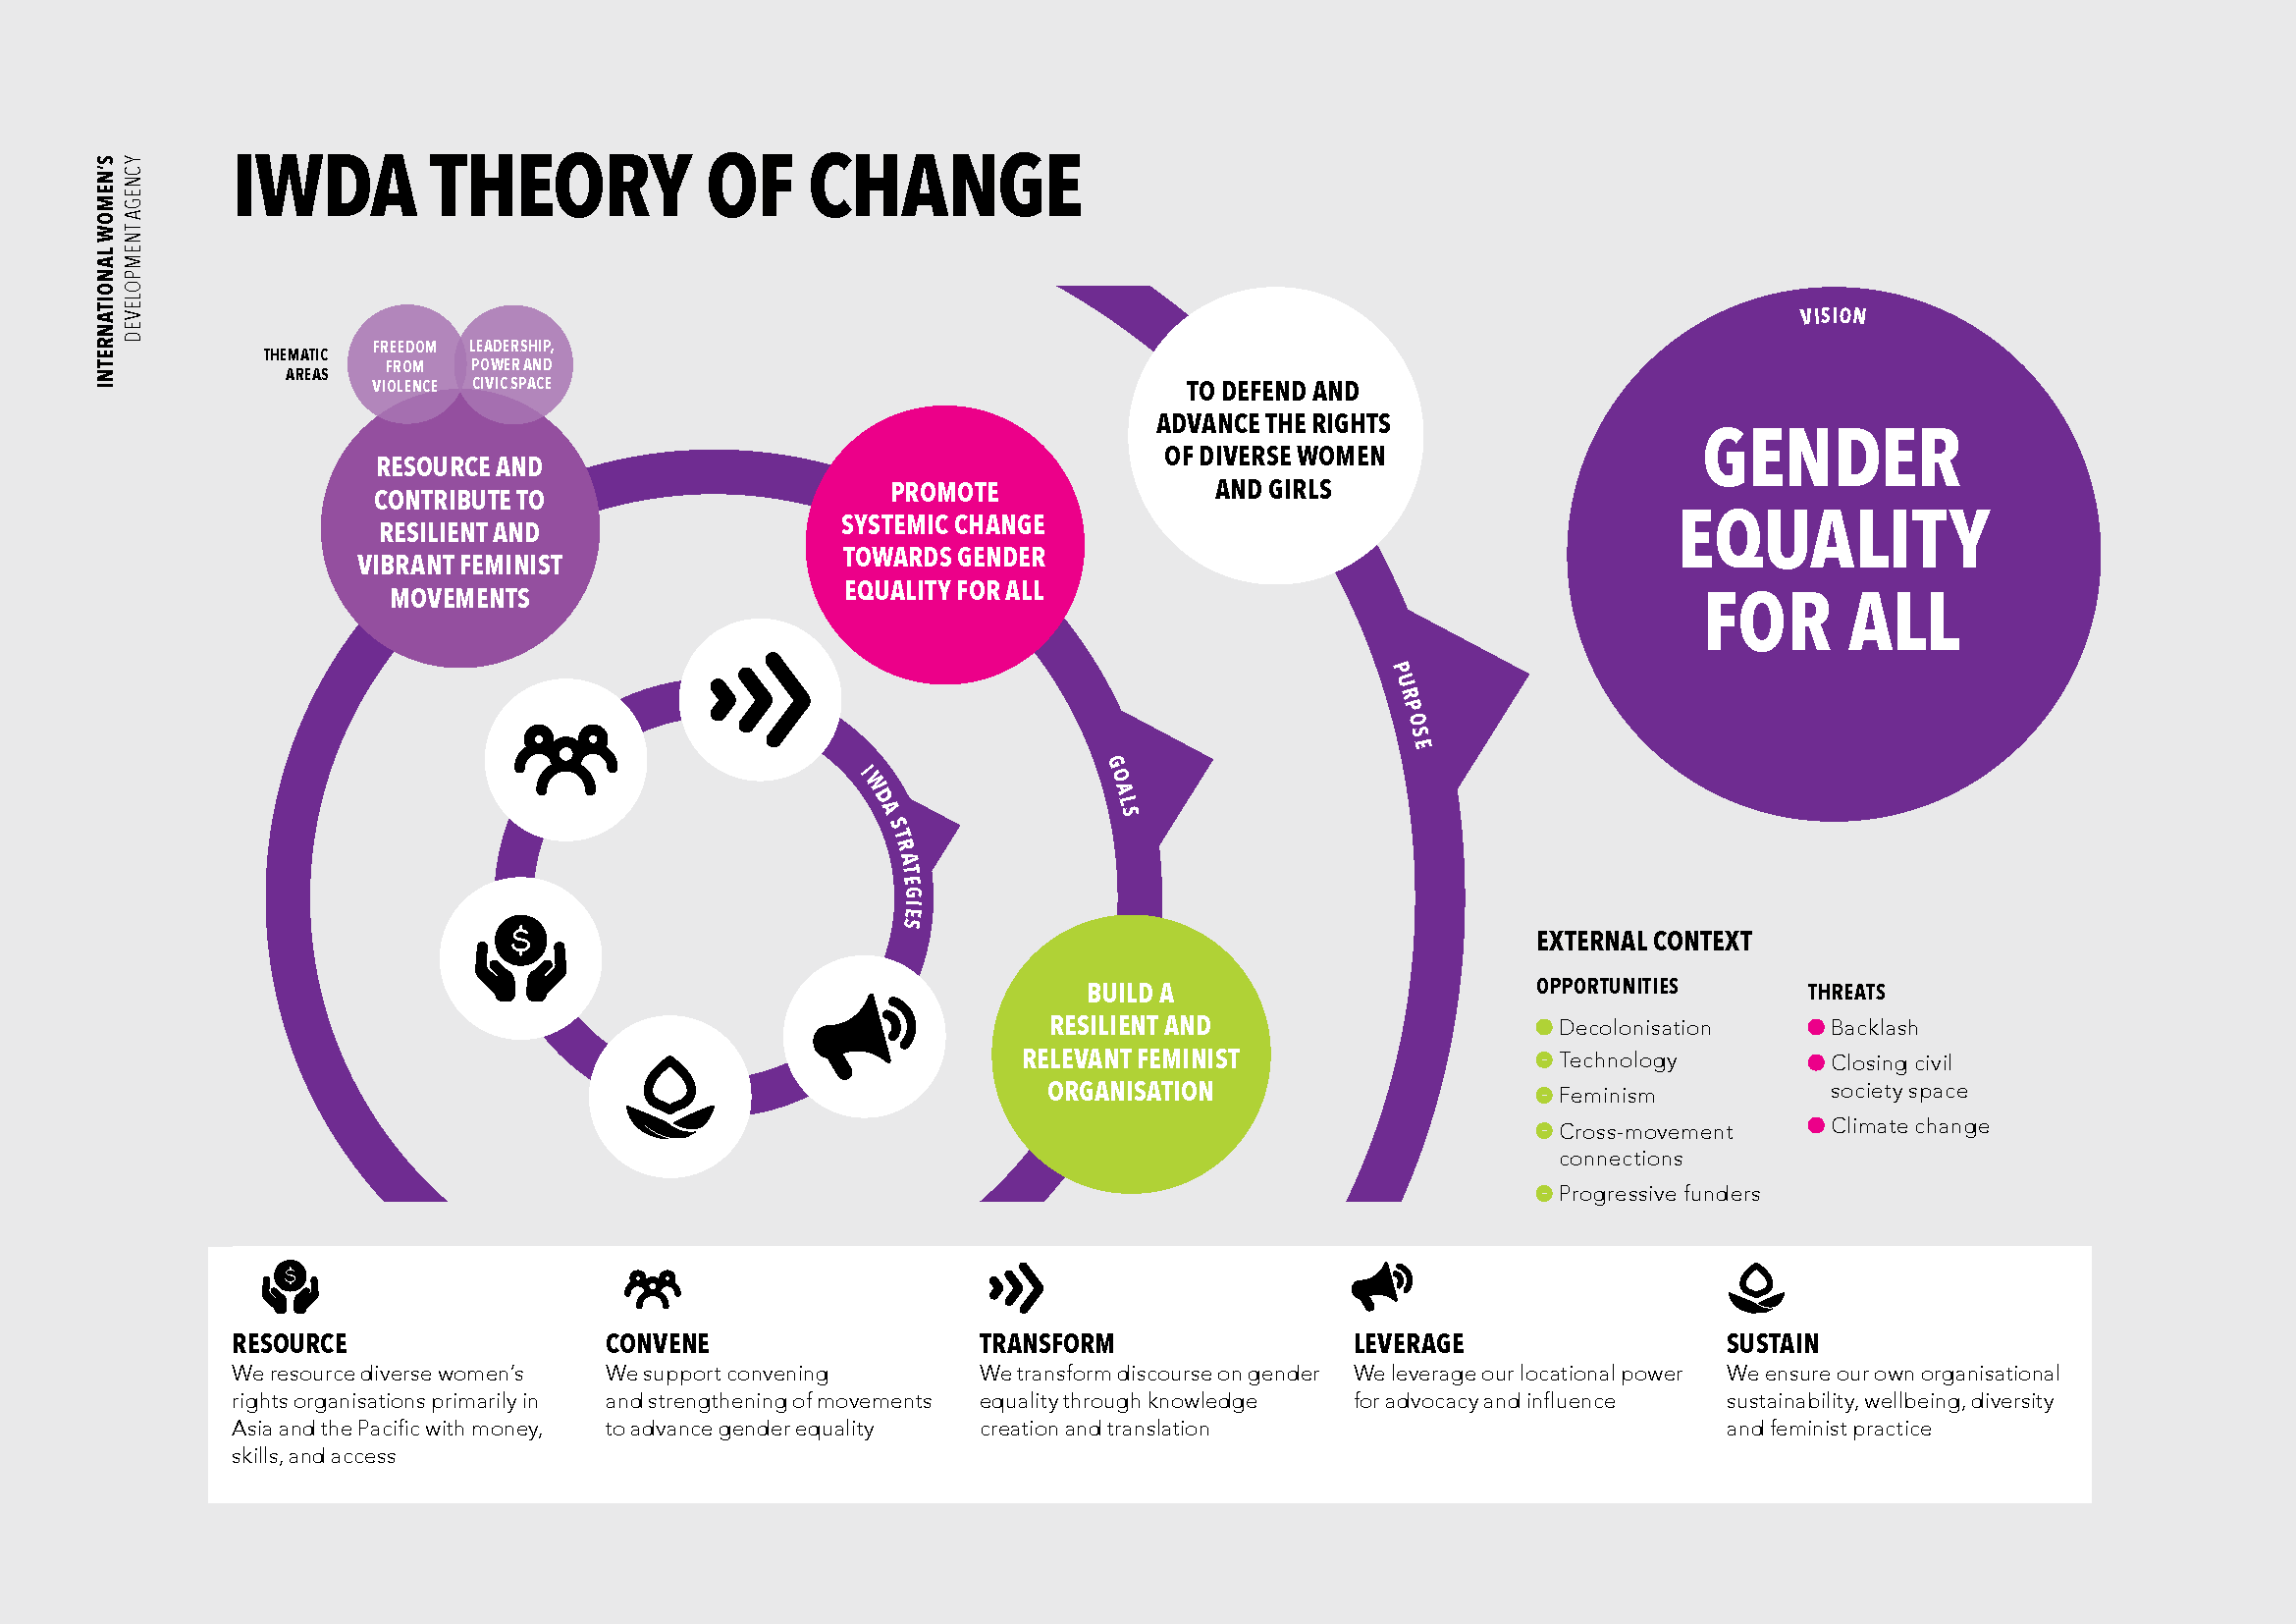 Graphic design visualizing the strategy's theory of change